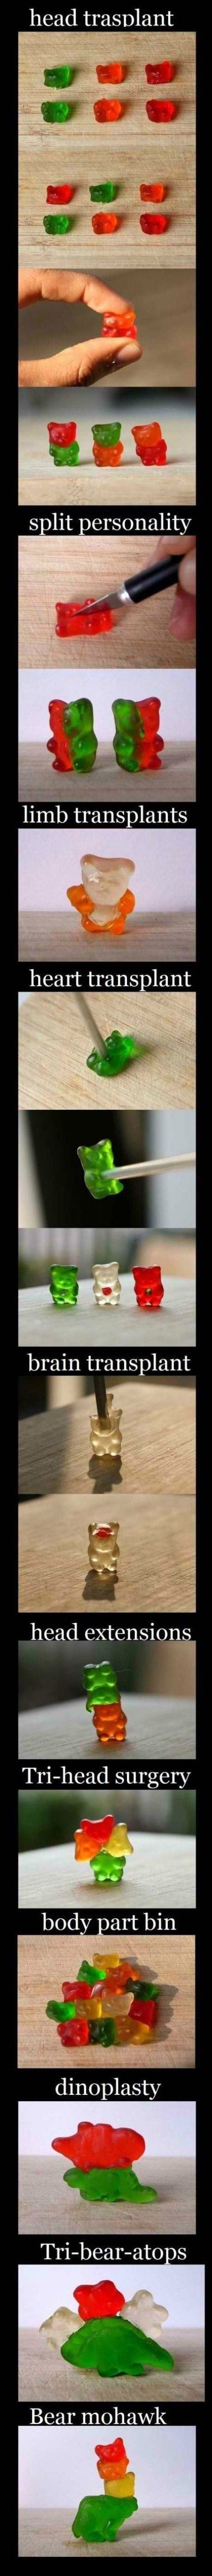 Things to do with gummy bears.